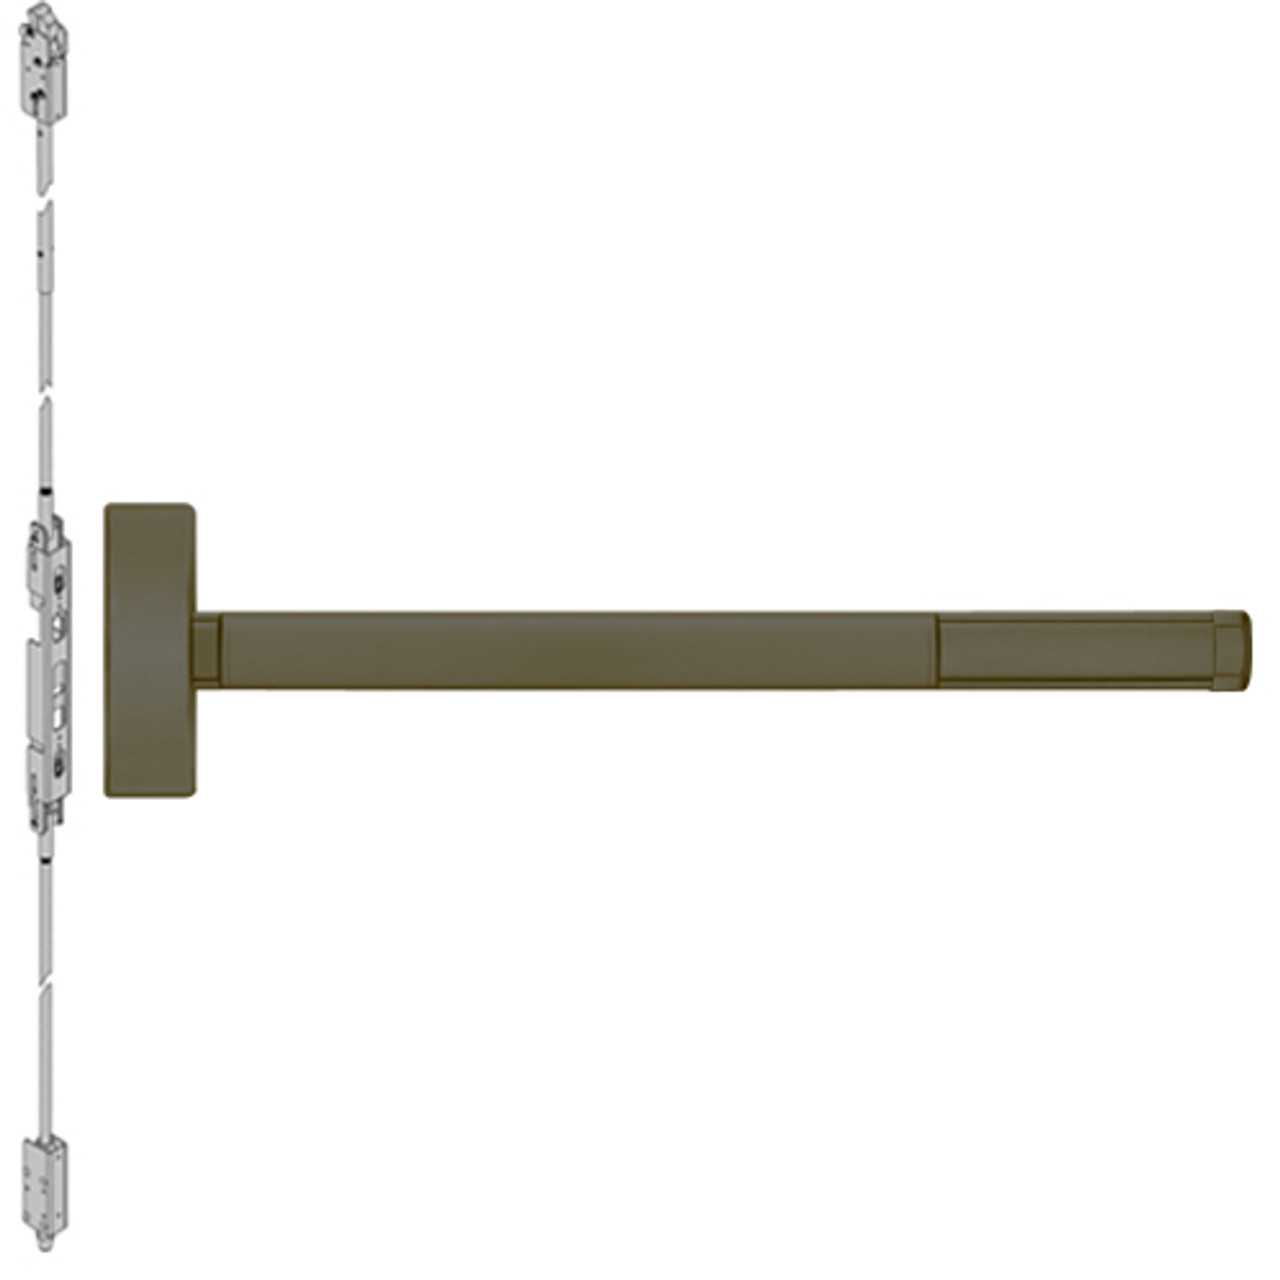 ELRFL2802-613-36 PHI 2800 Series Fire Rated Concealed Vertical Rod Exit Device with Electric Latch Retraction Prepped for Dummy Trim in Oil Rubbed Bronze Finish